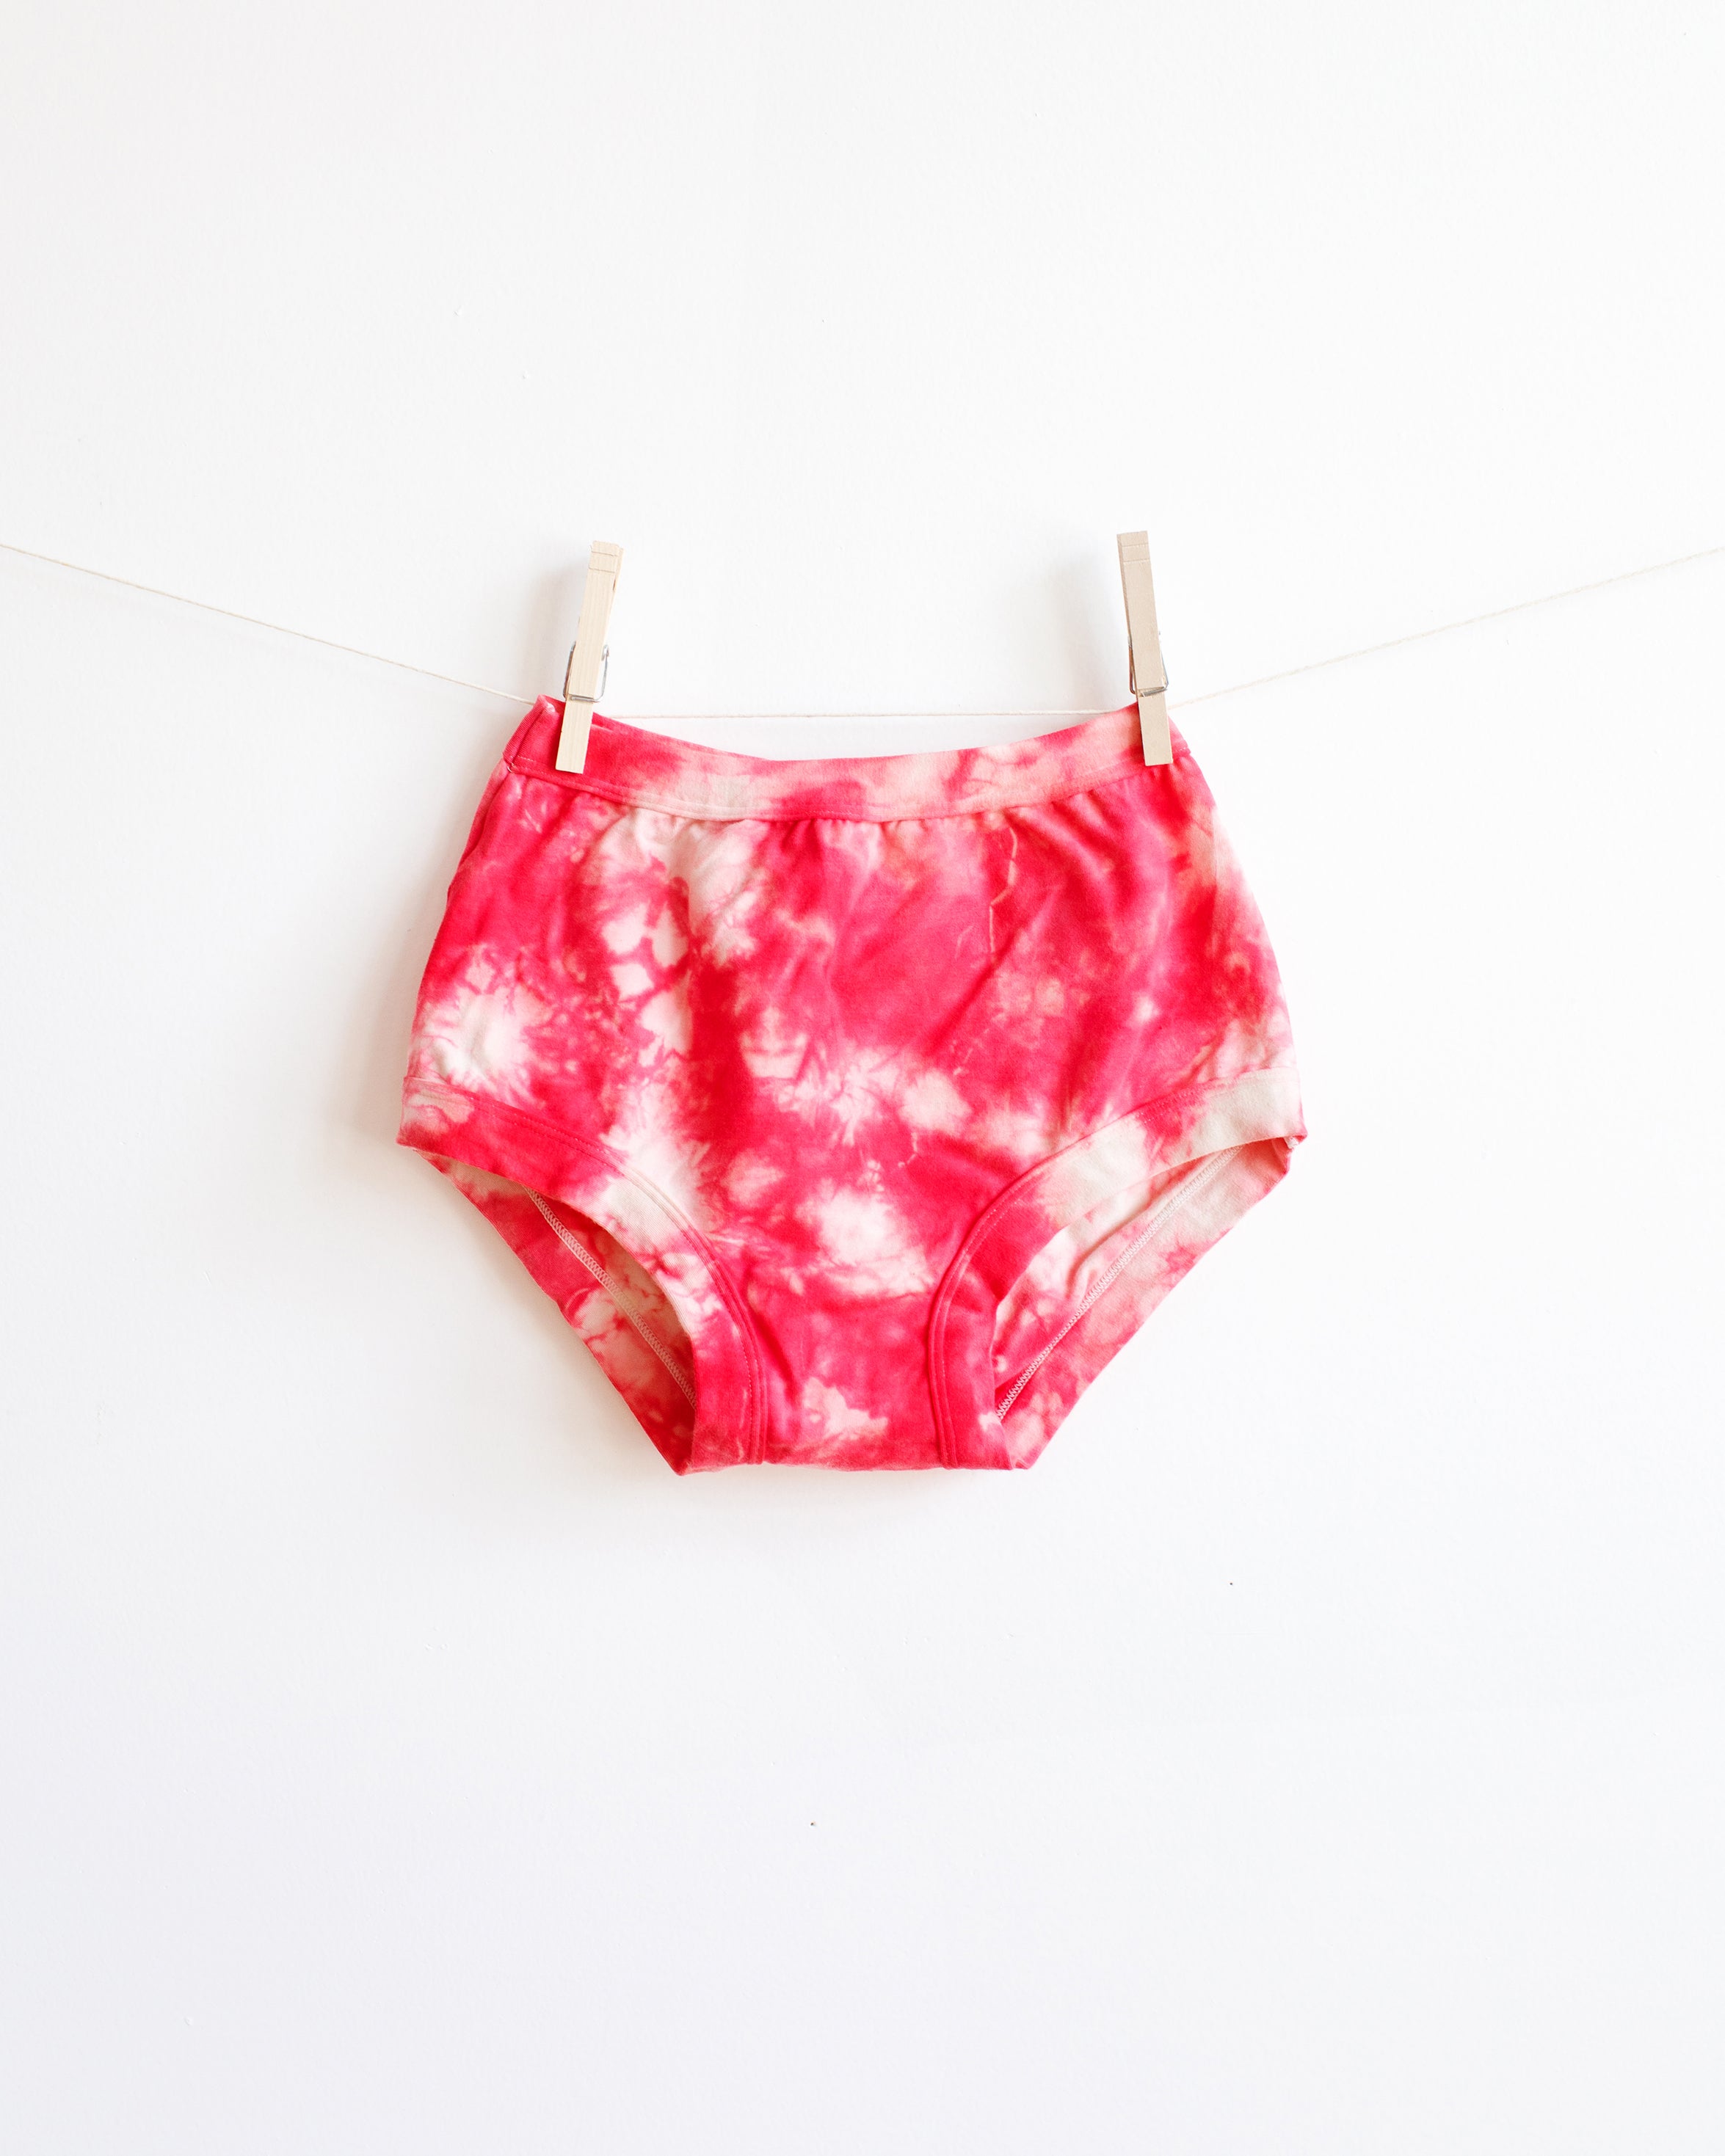 Hanging Thunderpants Original style underwear with red and white scrunch dye on white background.